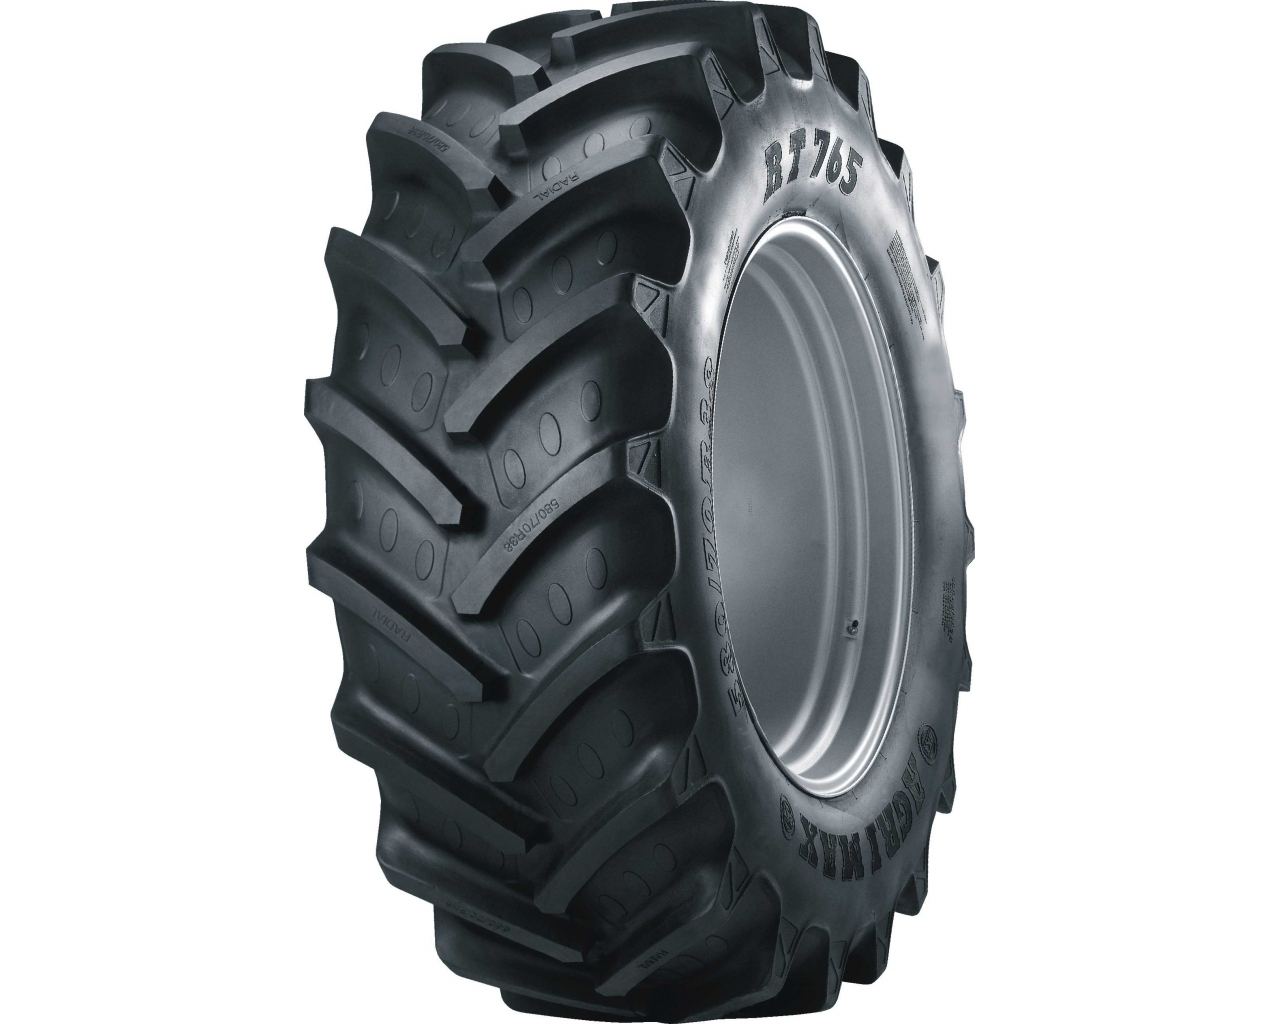 Шина 520/70R38 BKT AGRIMAX RT-765 150A8 TL